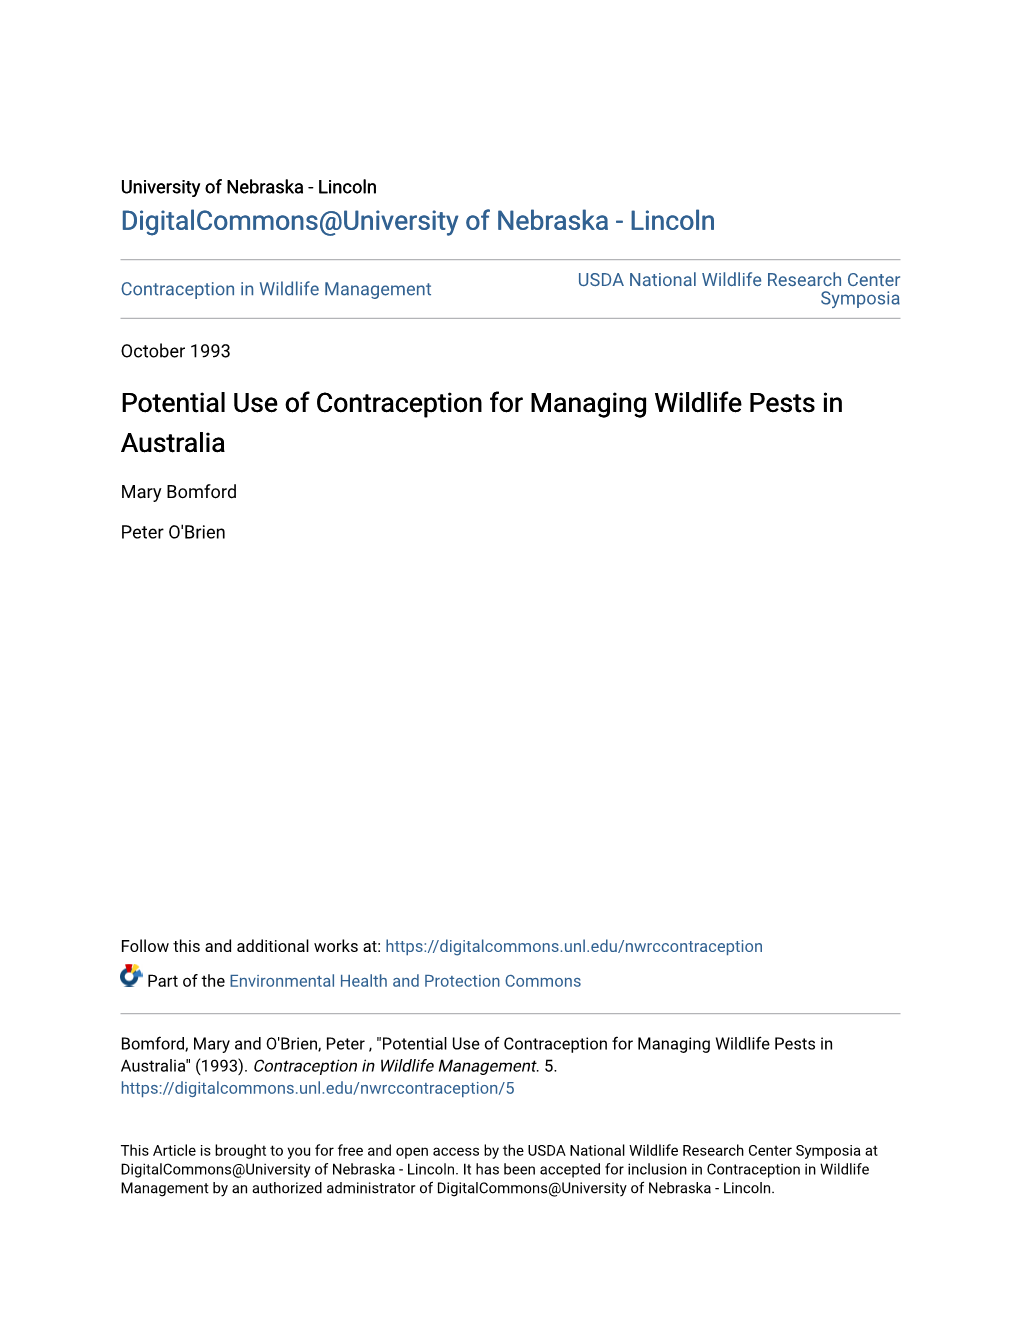 Potential Use of Contraception for Managing Wildlife Pests in Australia